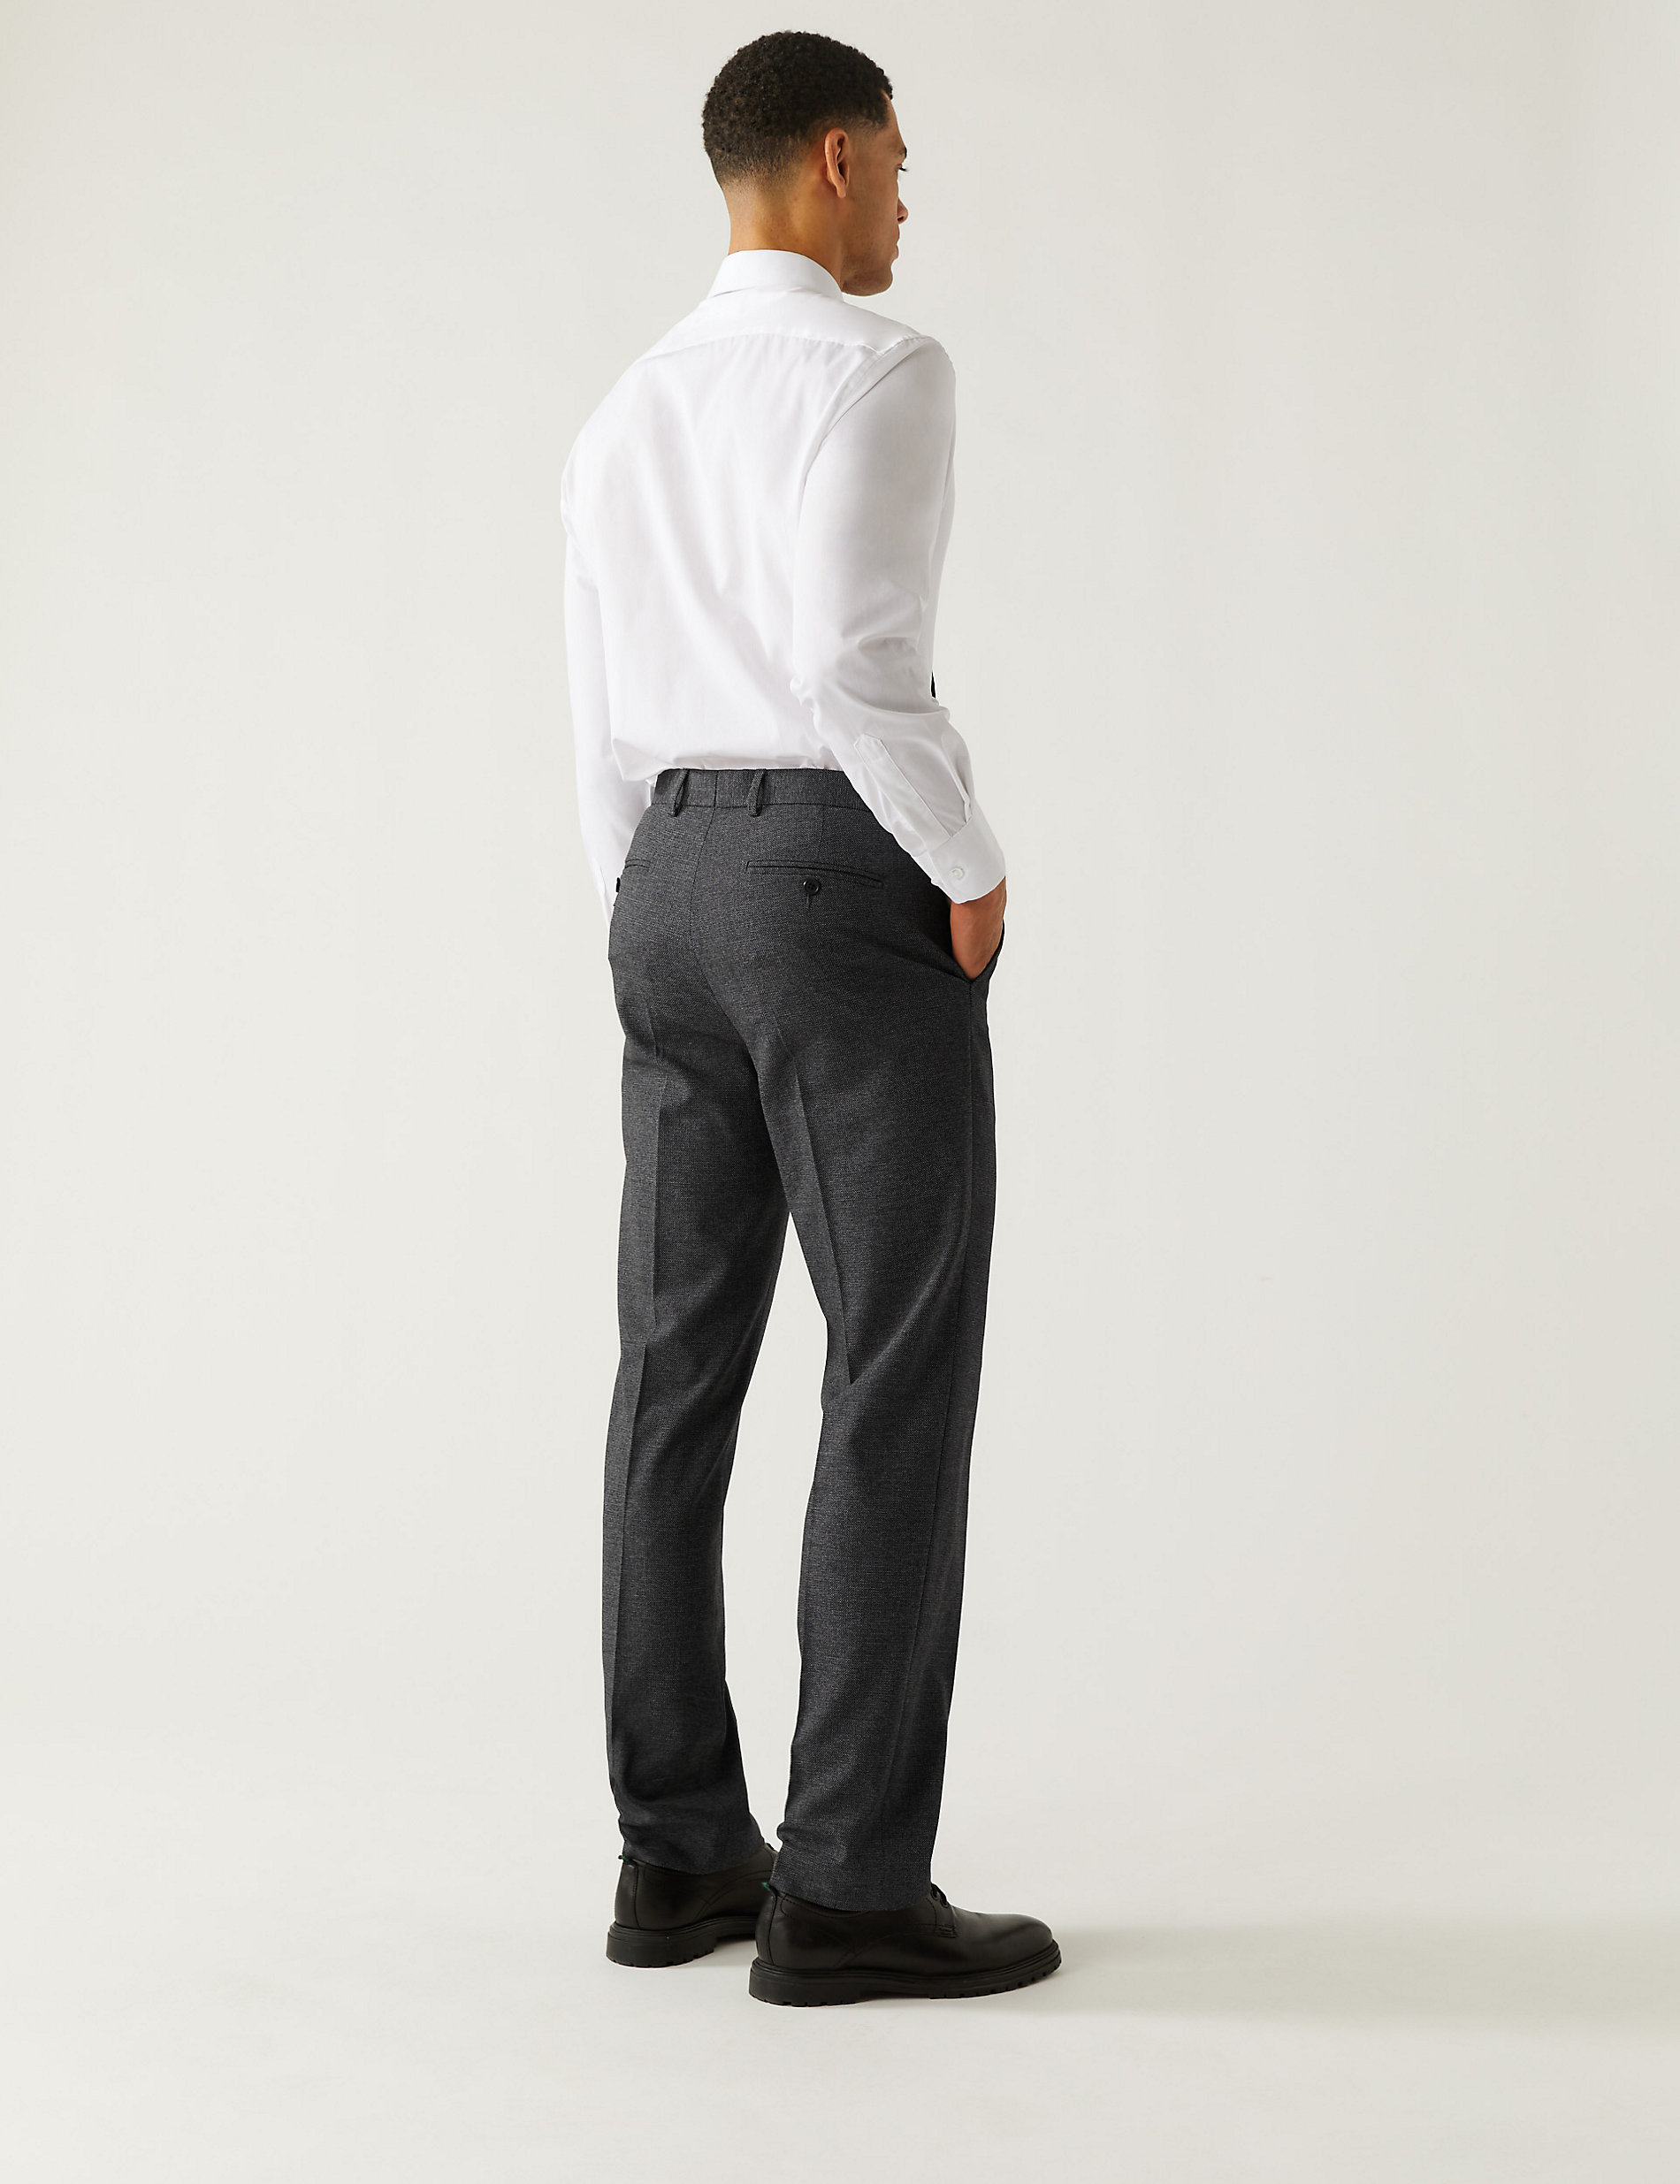 Regular Fit Stretch Trousers